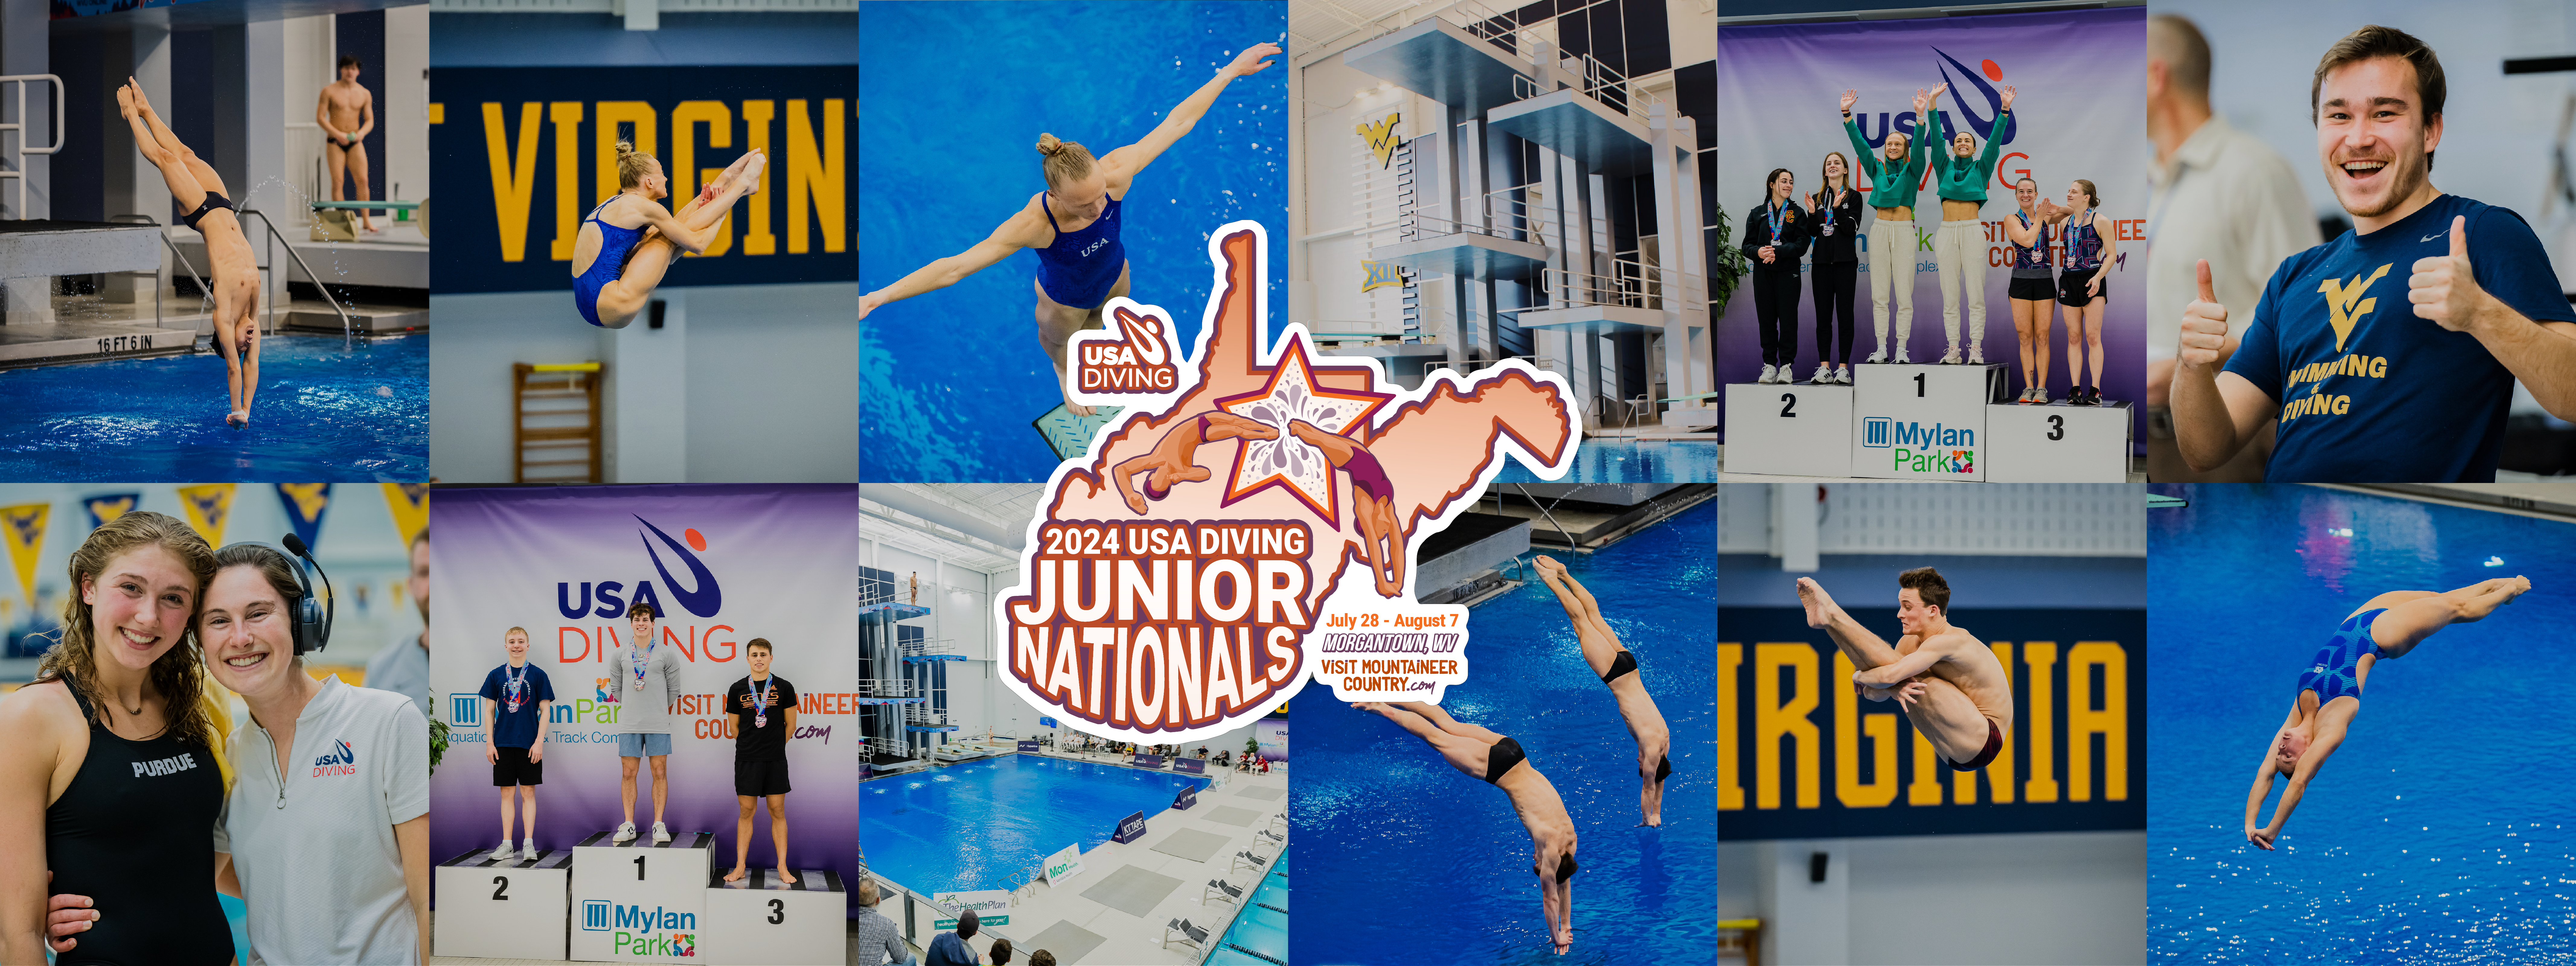 2024 USA Diving Junior National Championships will be held July 28 - August 7 at the Aquatic Center at Mylan Park in Morgantown, W.V.